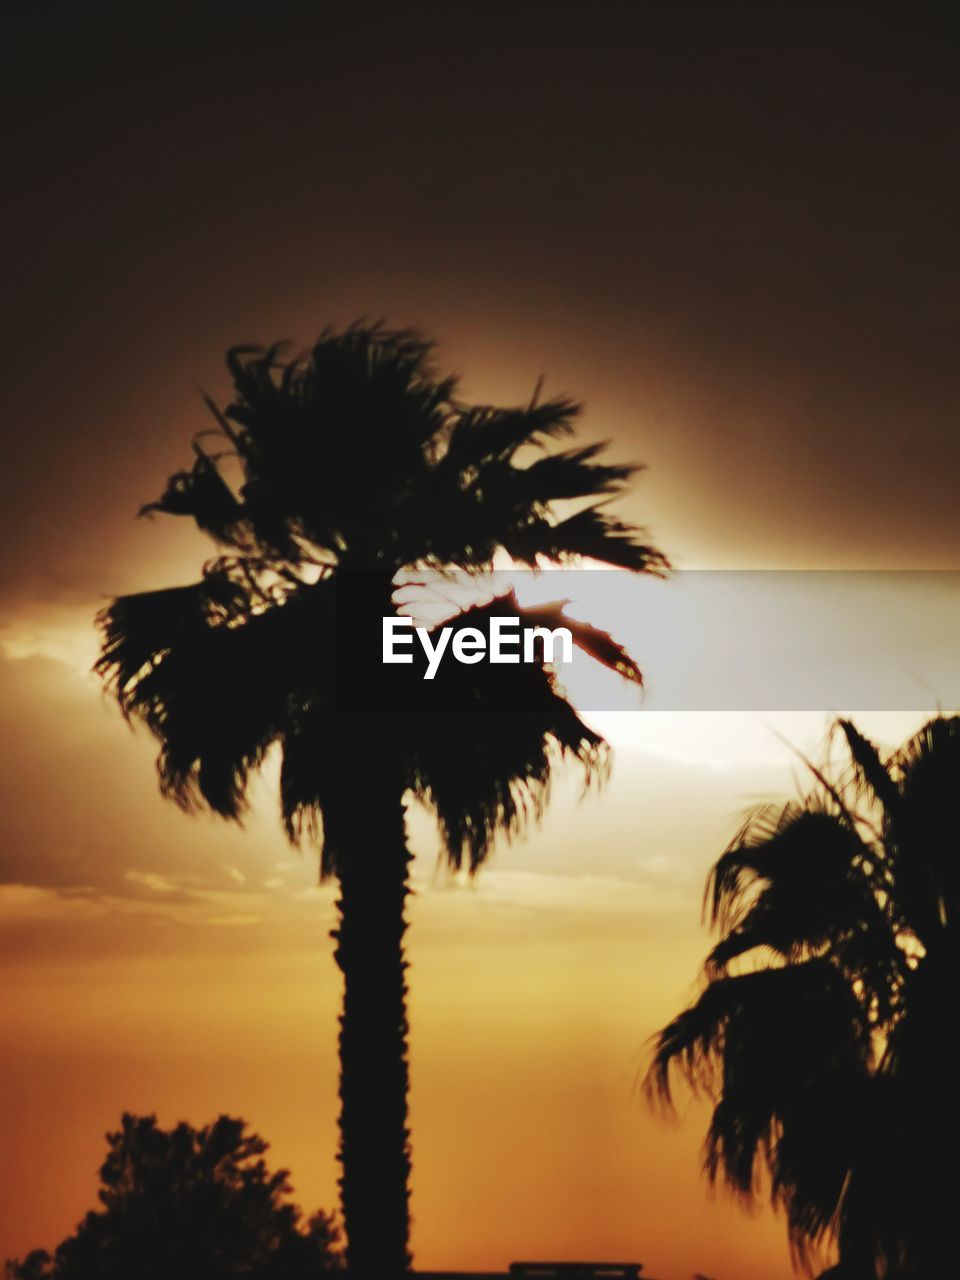 palm tree, tree, tropical climate, sky, silhouette, sunset, plant, nature, beauty in nature, tranquility, dusk, tranquil scene, scenics - nature, sunlight, no people, horizon, coconut palm tree, back lit, tropical tree, idyllic, cloud, evening, outdoors, dramatic sky, leaf, palm leaf, growth, environment, land, copy space, travel destinations, sun, borassus flabellifer, low angle view, orange color, holiday, vacation, landscape, outline, savanna